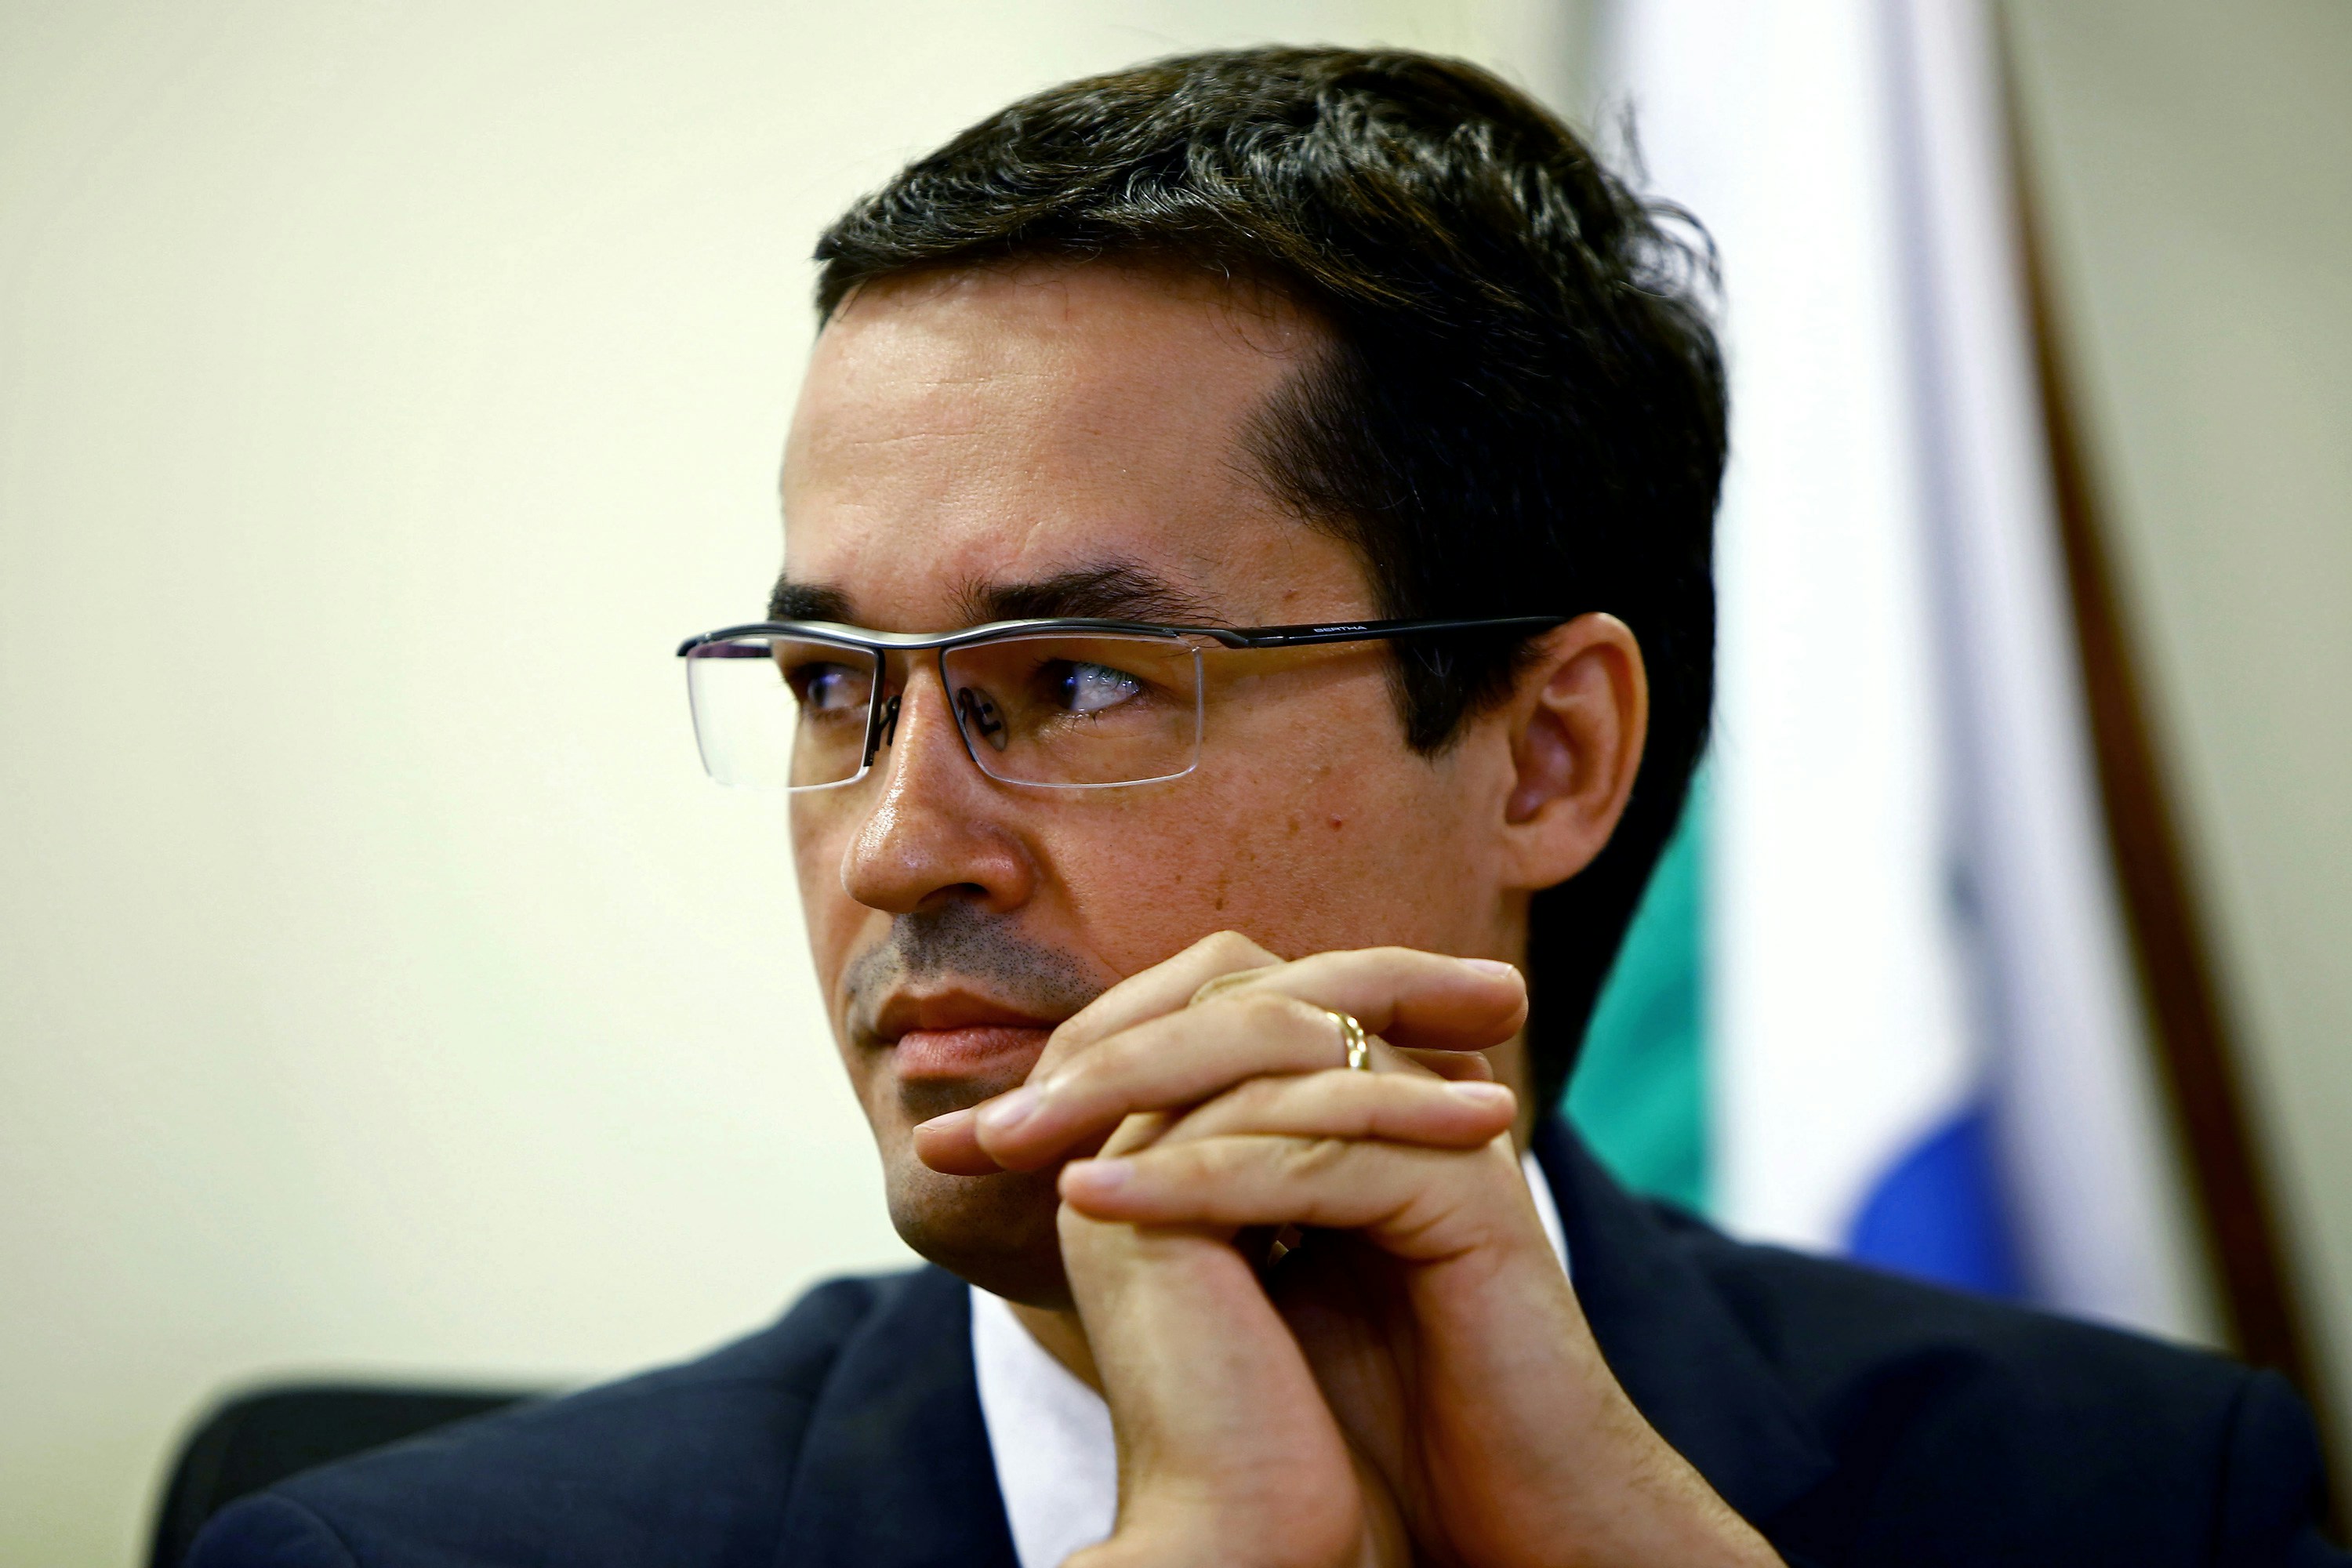 Brazilian Federal Attorney Deltan Dallagnol listens, during the ceremony for the return of resources to Petrobras, which were recovered through cooperation and leniency agreements  in connection with Lava Jato operation, in Curitiba, Brazil on December 07, 2017.  Petrobras received 654 million reais (200 million dollars) from legal agreements related to Lava Jato operation, the largest corruption investigation in Brazil's history, the state-owned company reported. / AFP PHOTO / Heuler Andrey        (Photo credit should read HEULER ANDREY/AFP/Getty Images)